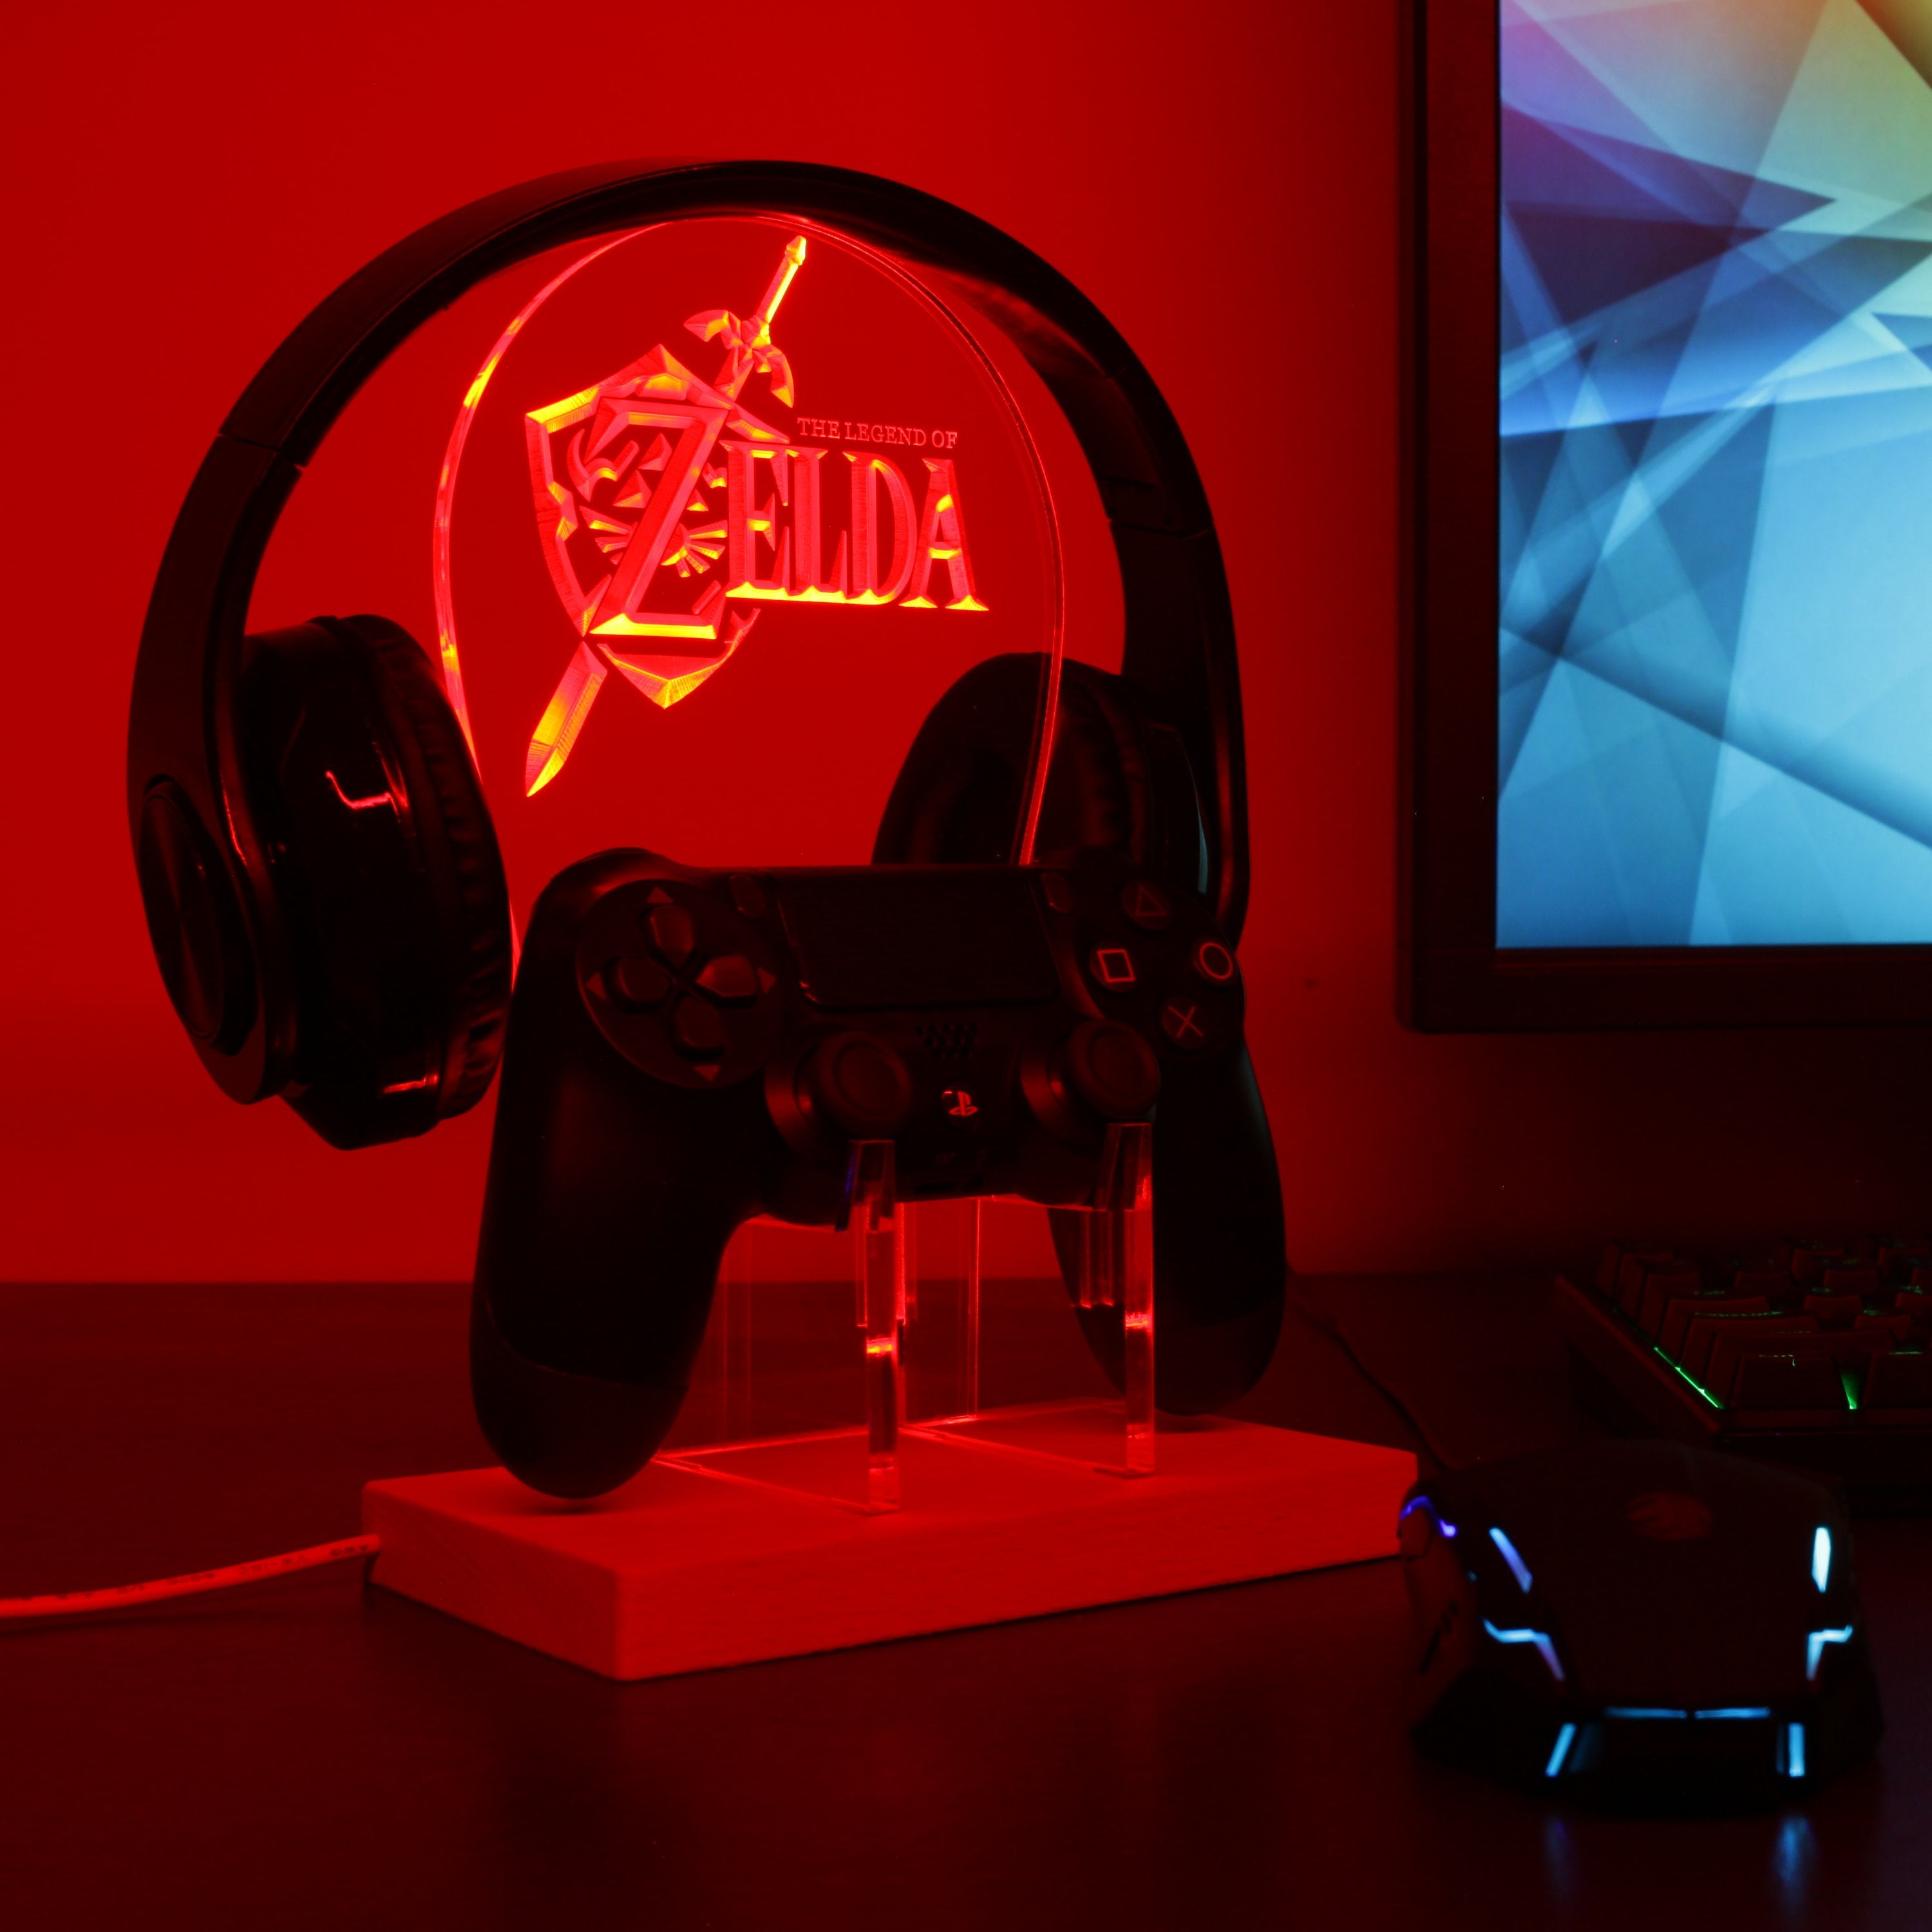 The Legend of Zelda LED Gaming Headset Controller Stand